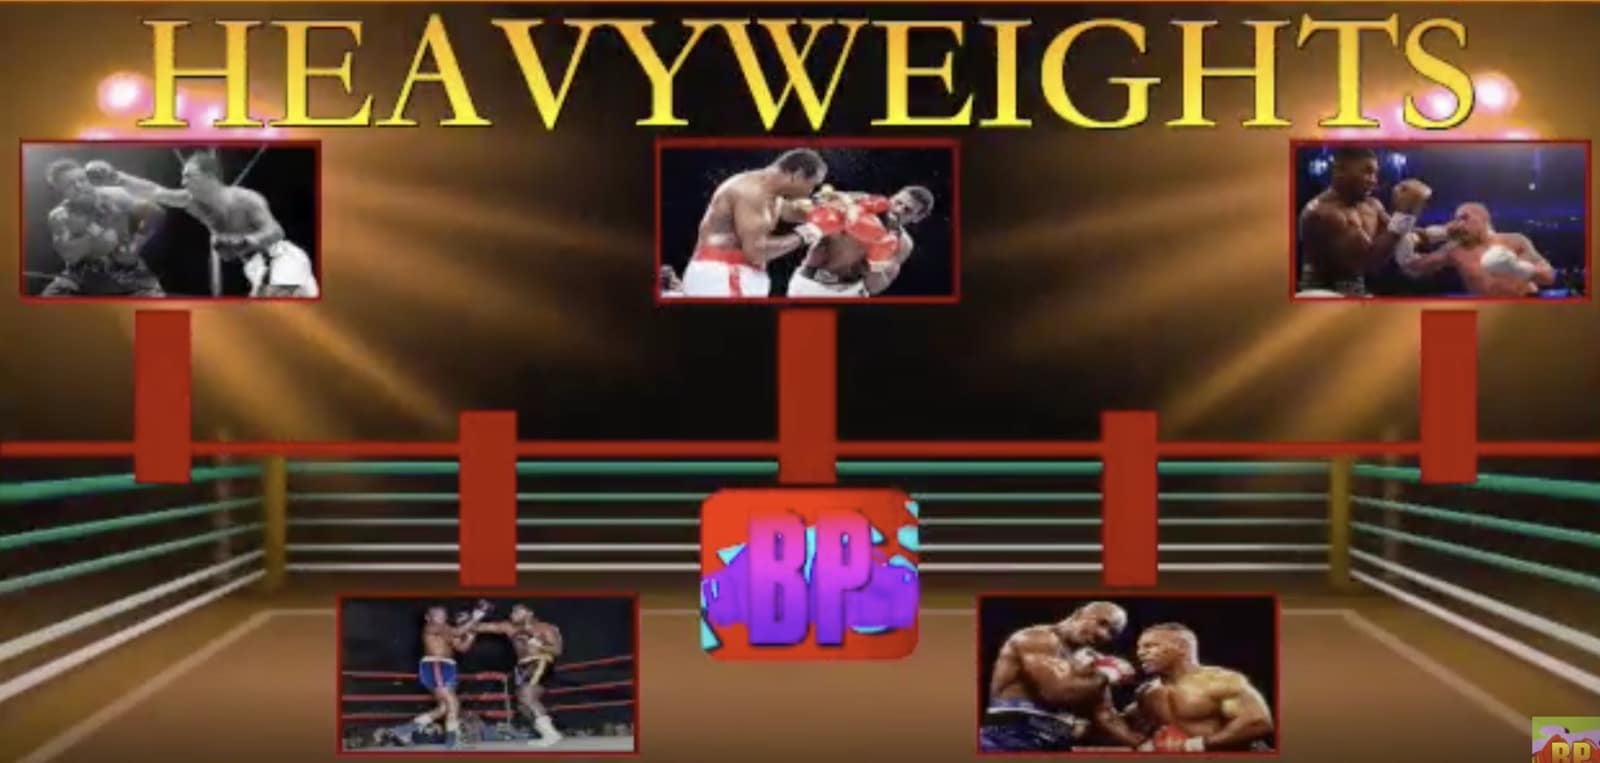 VIDEO: A Timeline of Cross (Heavy)Weight Class Title Matches